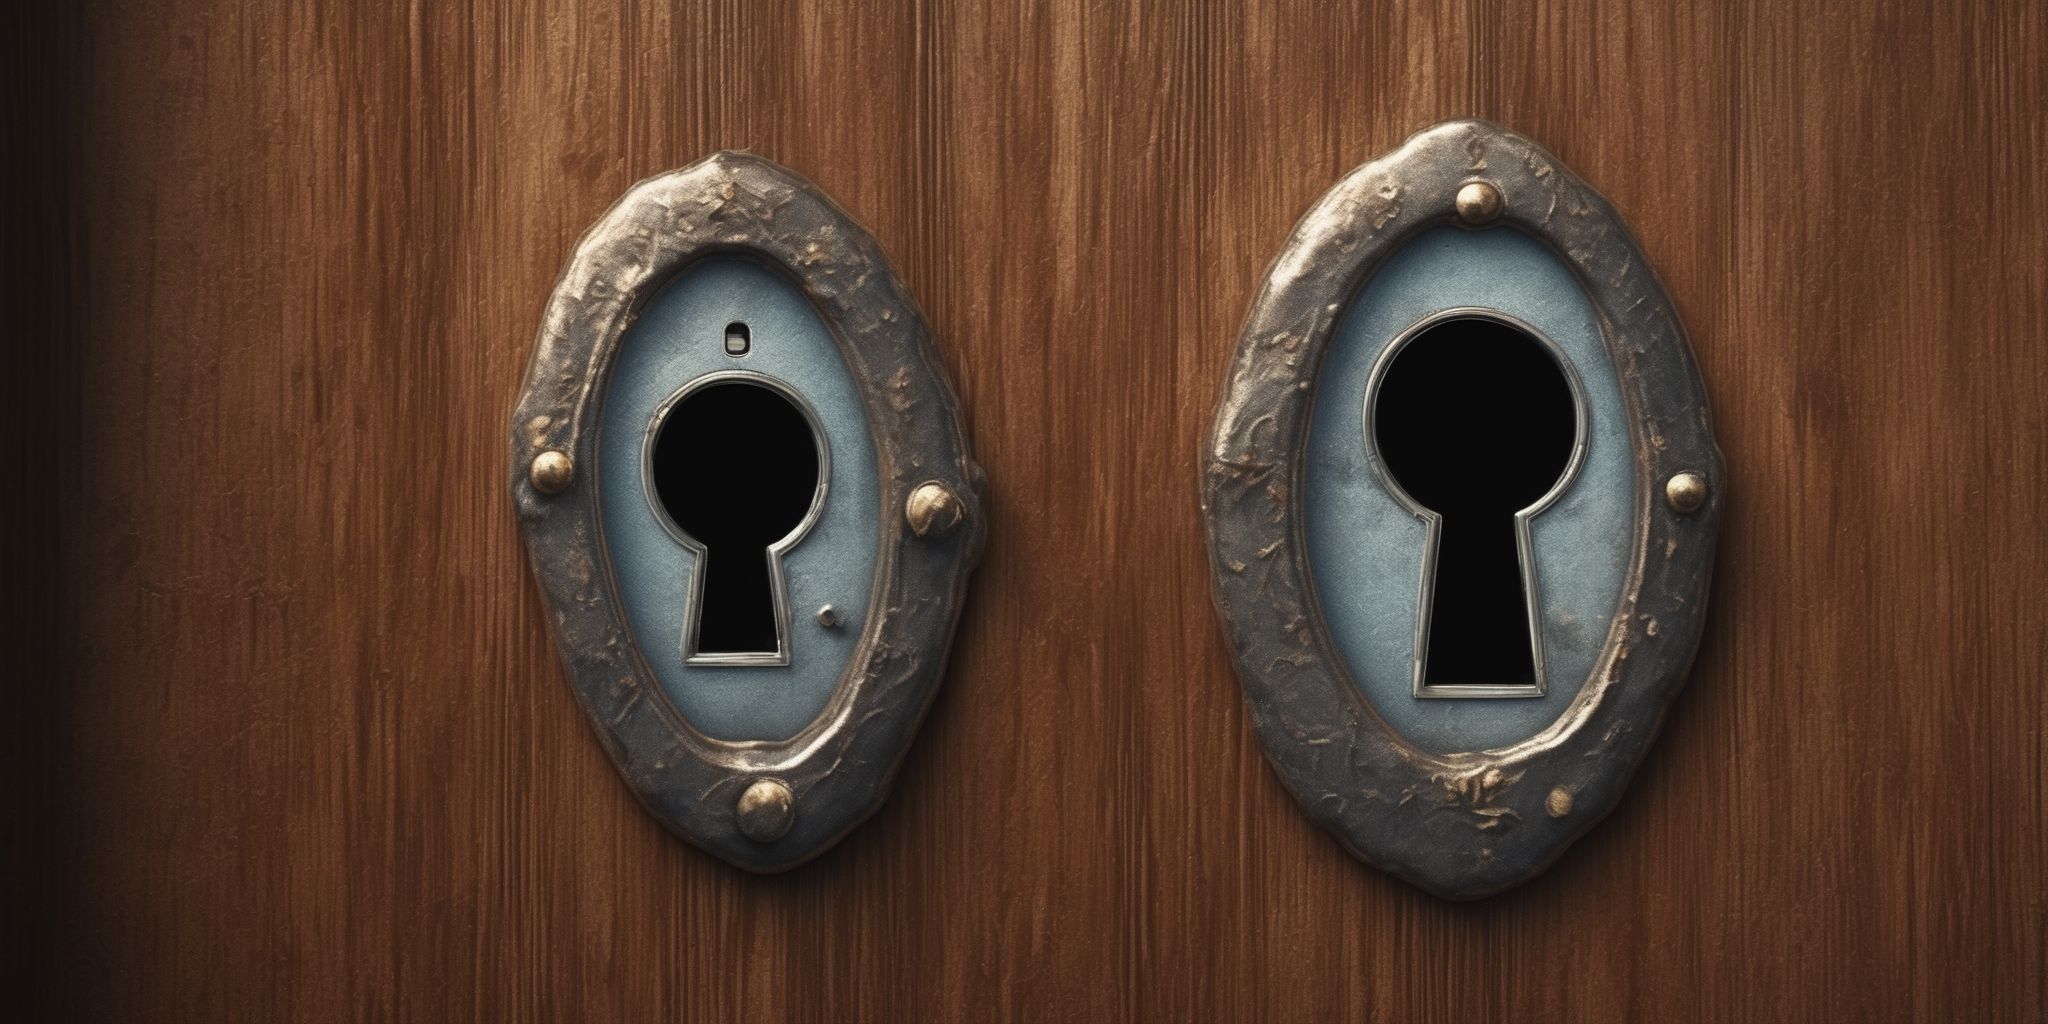 Keyhole  in realistic, photographic style